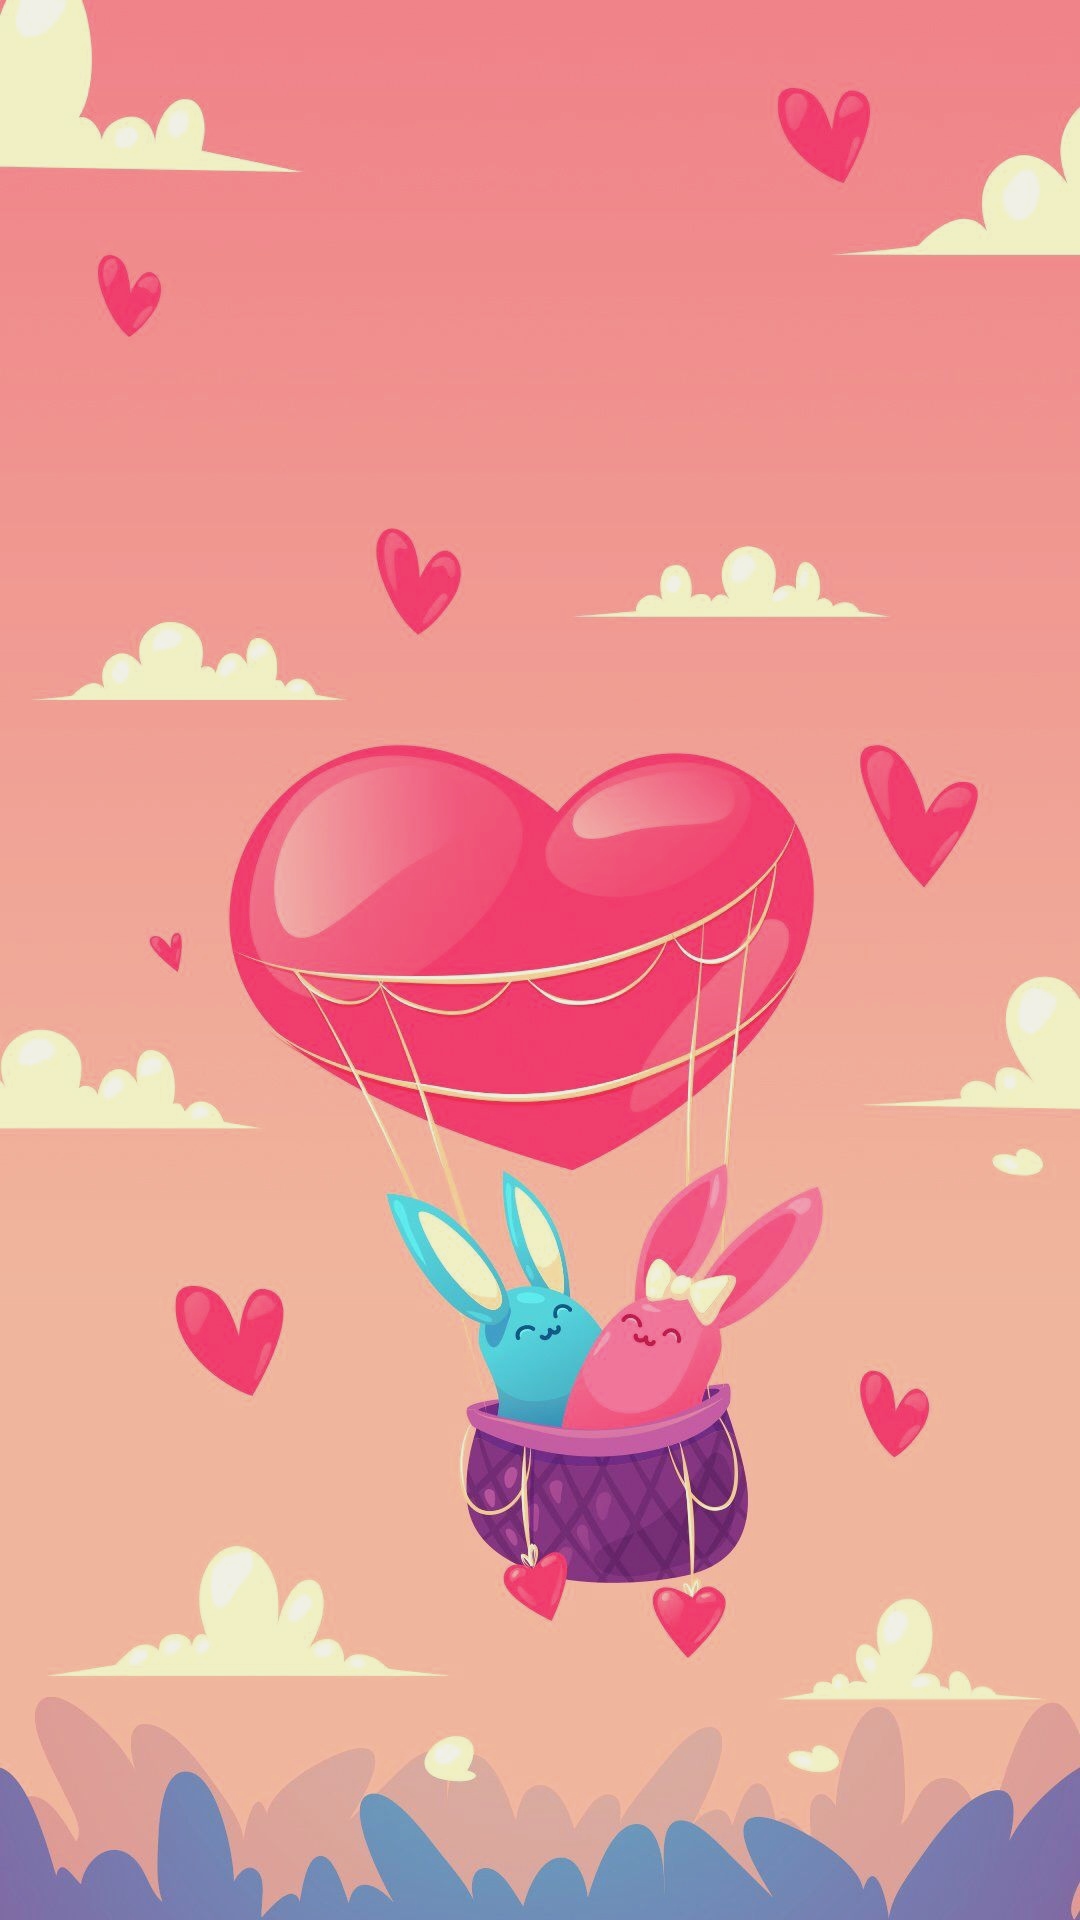 wallpapers and backgrounds,pink,heart,cartoon,illustration,sky